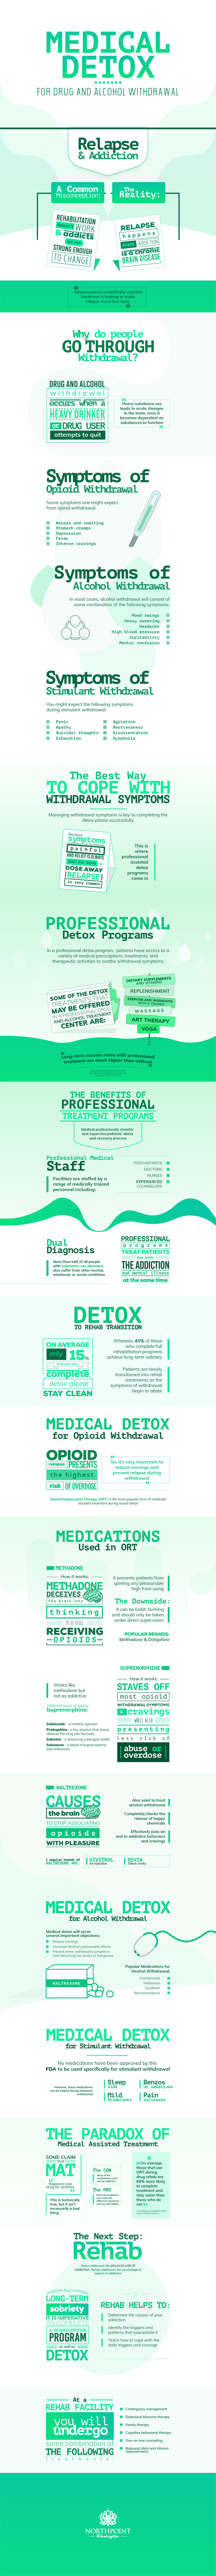 Medical Detox for Drug and Alcohol Withdrawal Inforgraphic